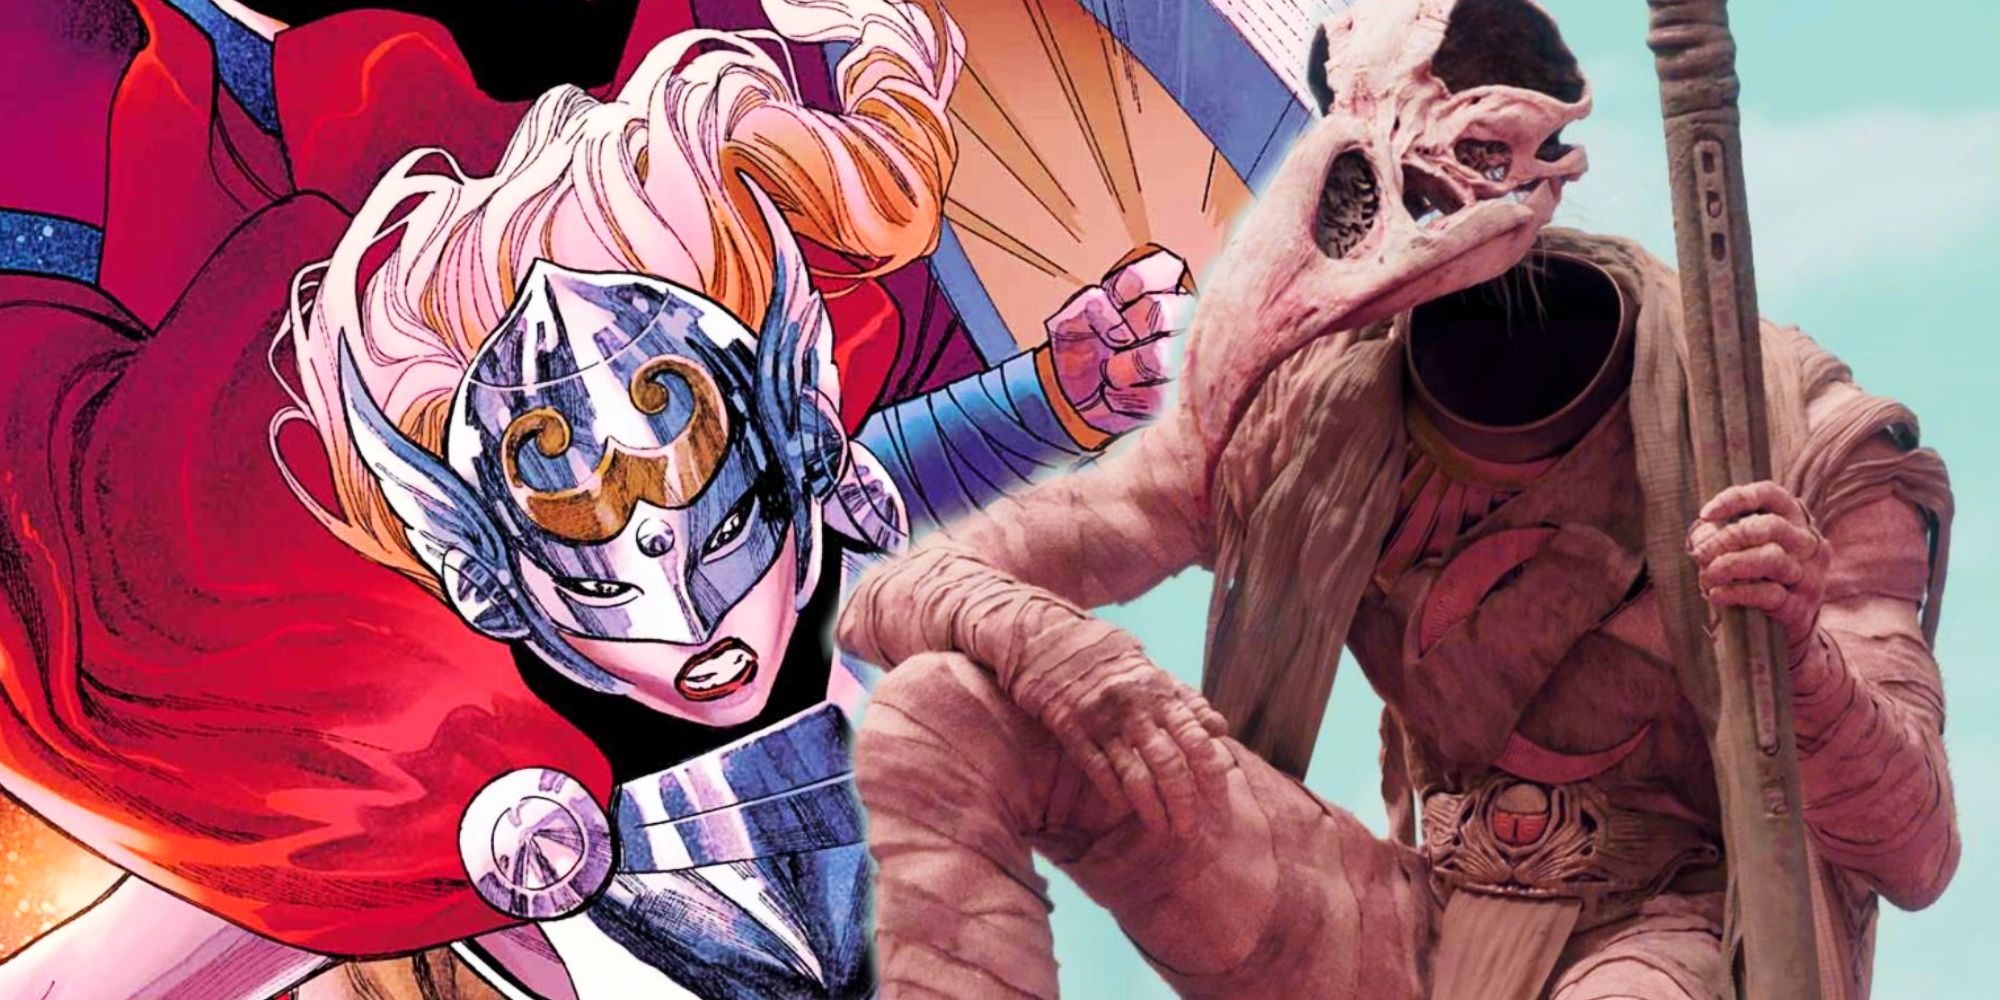 marvel just secretly teased why jane becomes mighty thor in thor: love and thunder moon knight Khonshu